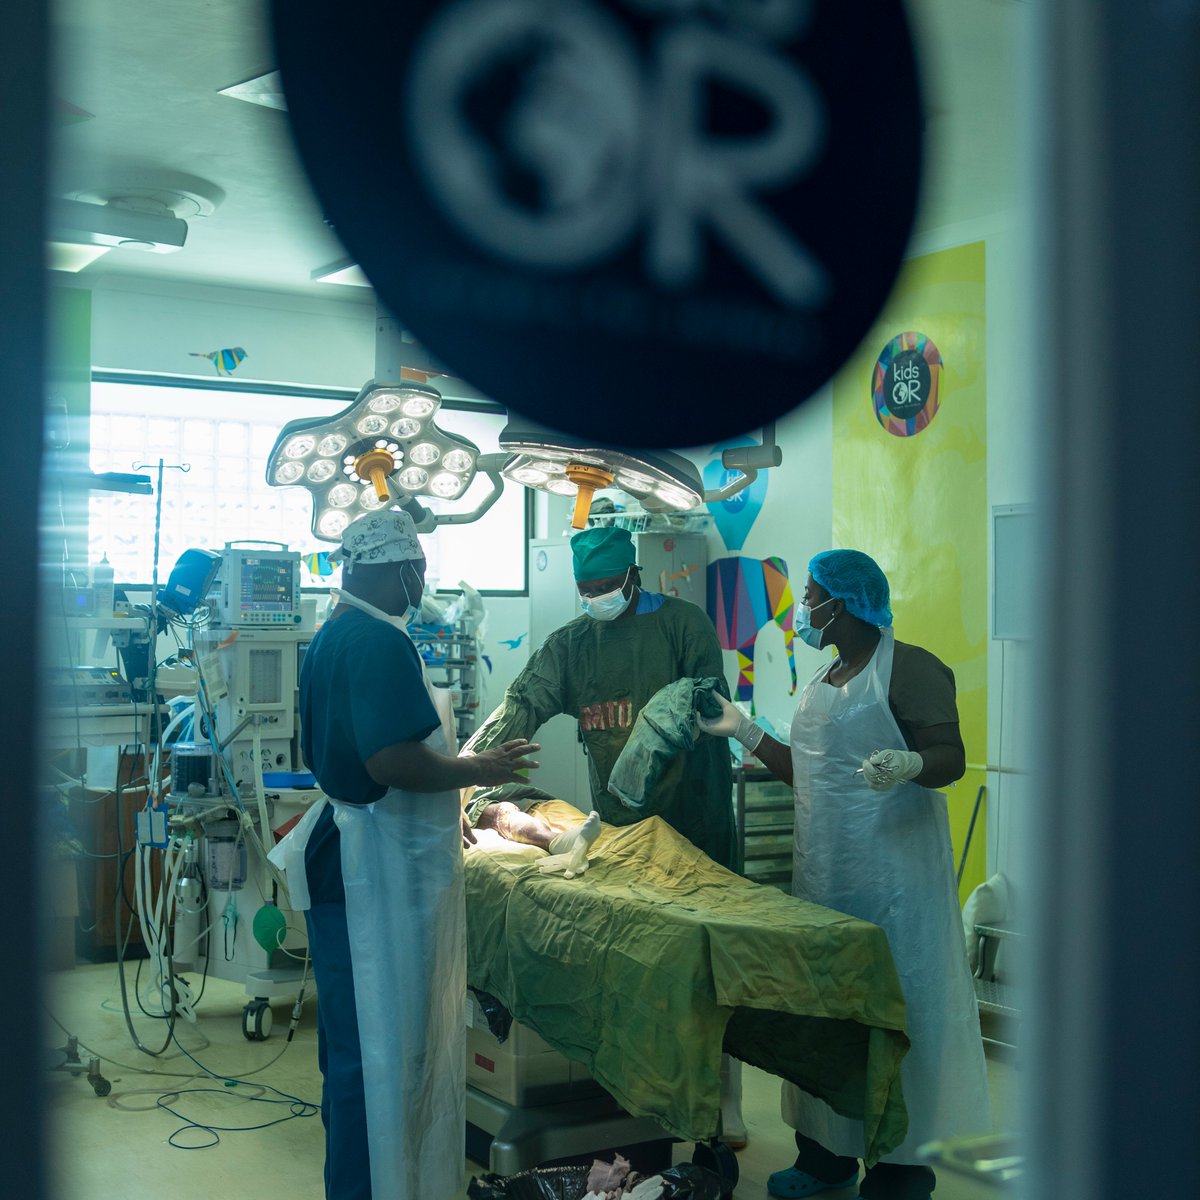 It's unacceptable that 9 out of 11 children in #LMICs cannot access safe, timely surgery when they need it. ❌

There's nothing Kids Operating Room won't do to bring this life-saving care closer to every child on the planet. 🌍

✊ It's simply too important. 

If you're with us -…